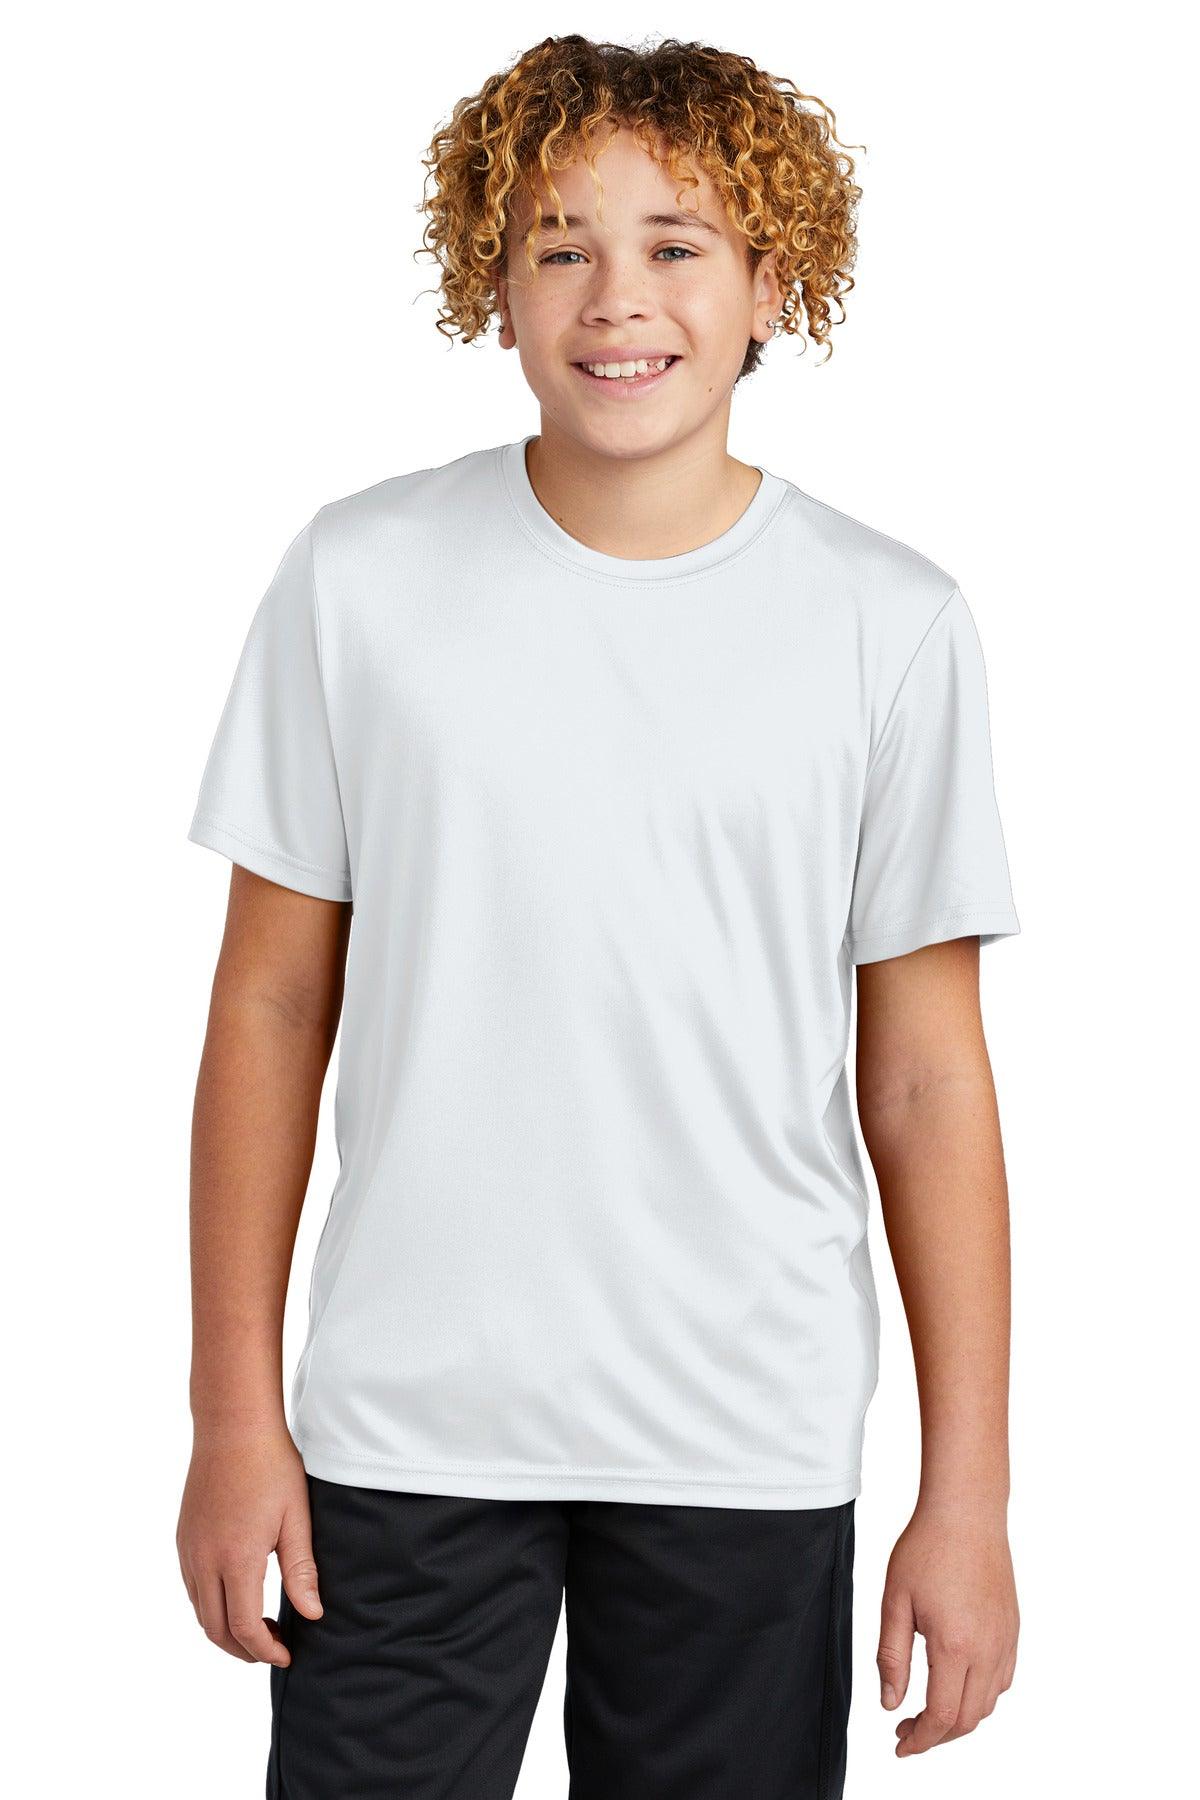 Sport-Tek Youth PosiCharge Re-Compete Tee YST720 - Dresses Max